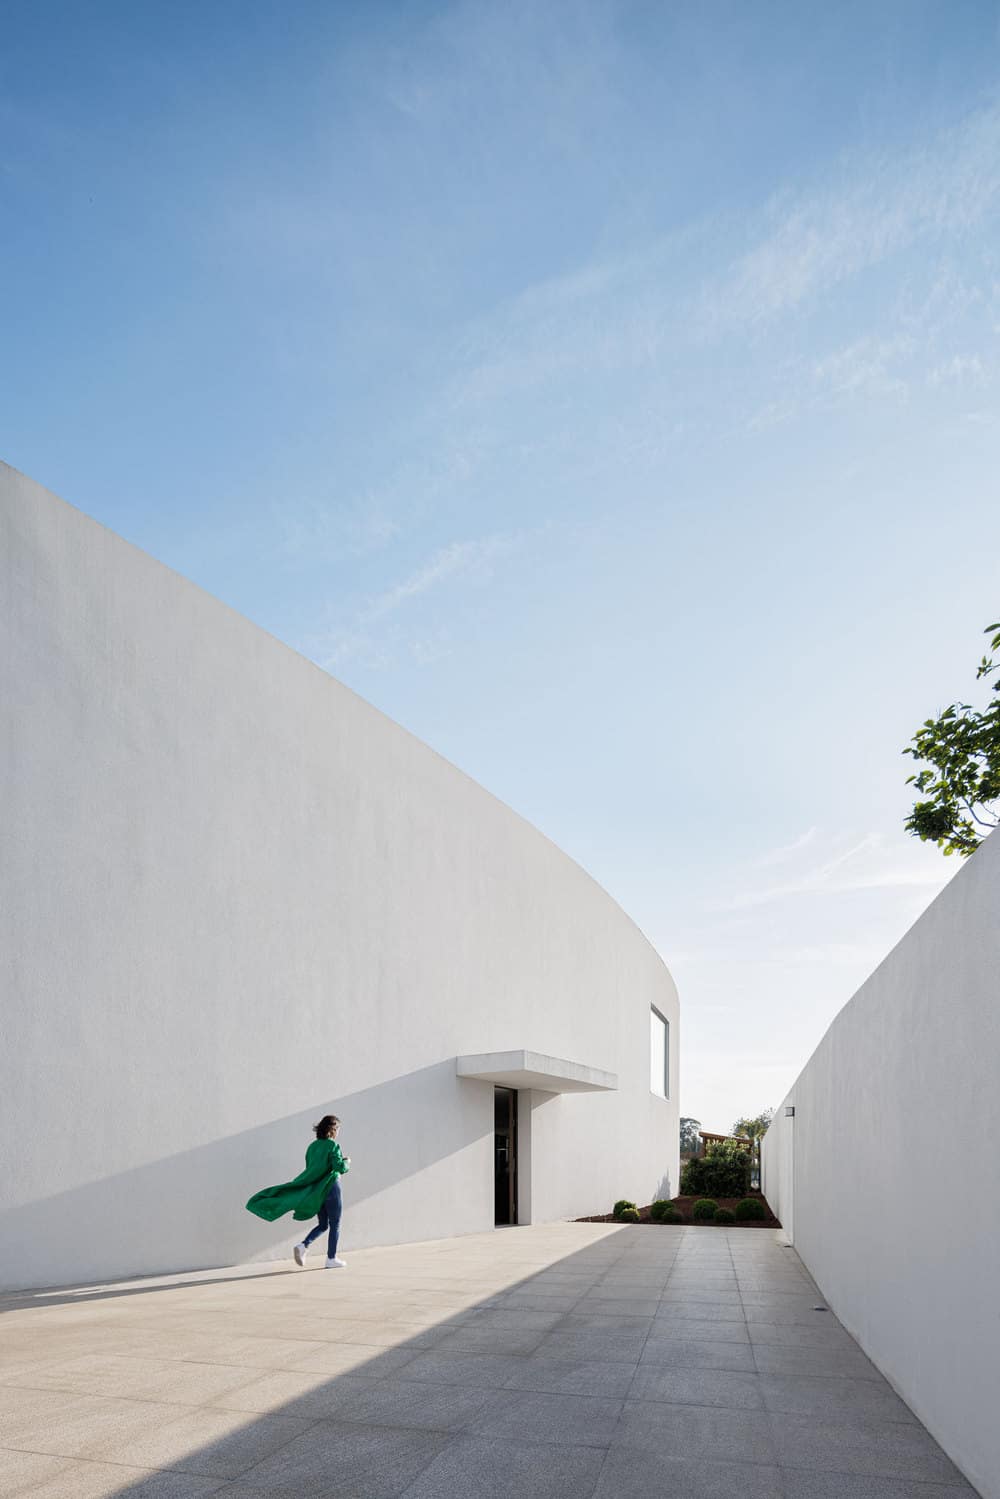 The Curved White House in Portugal